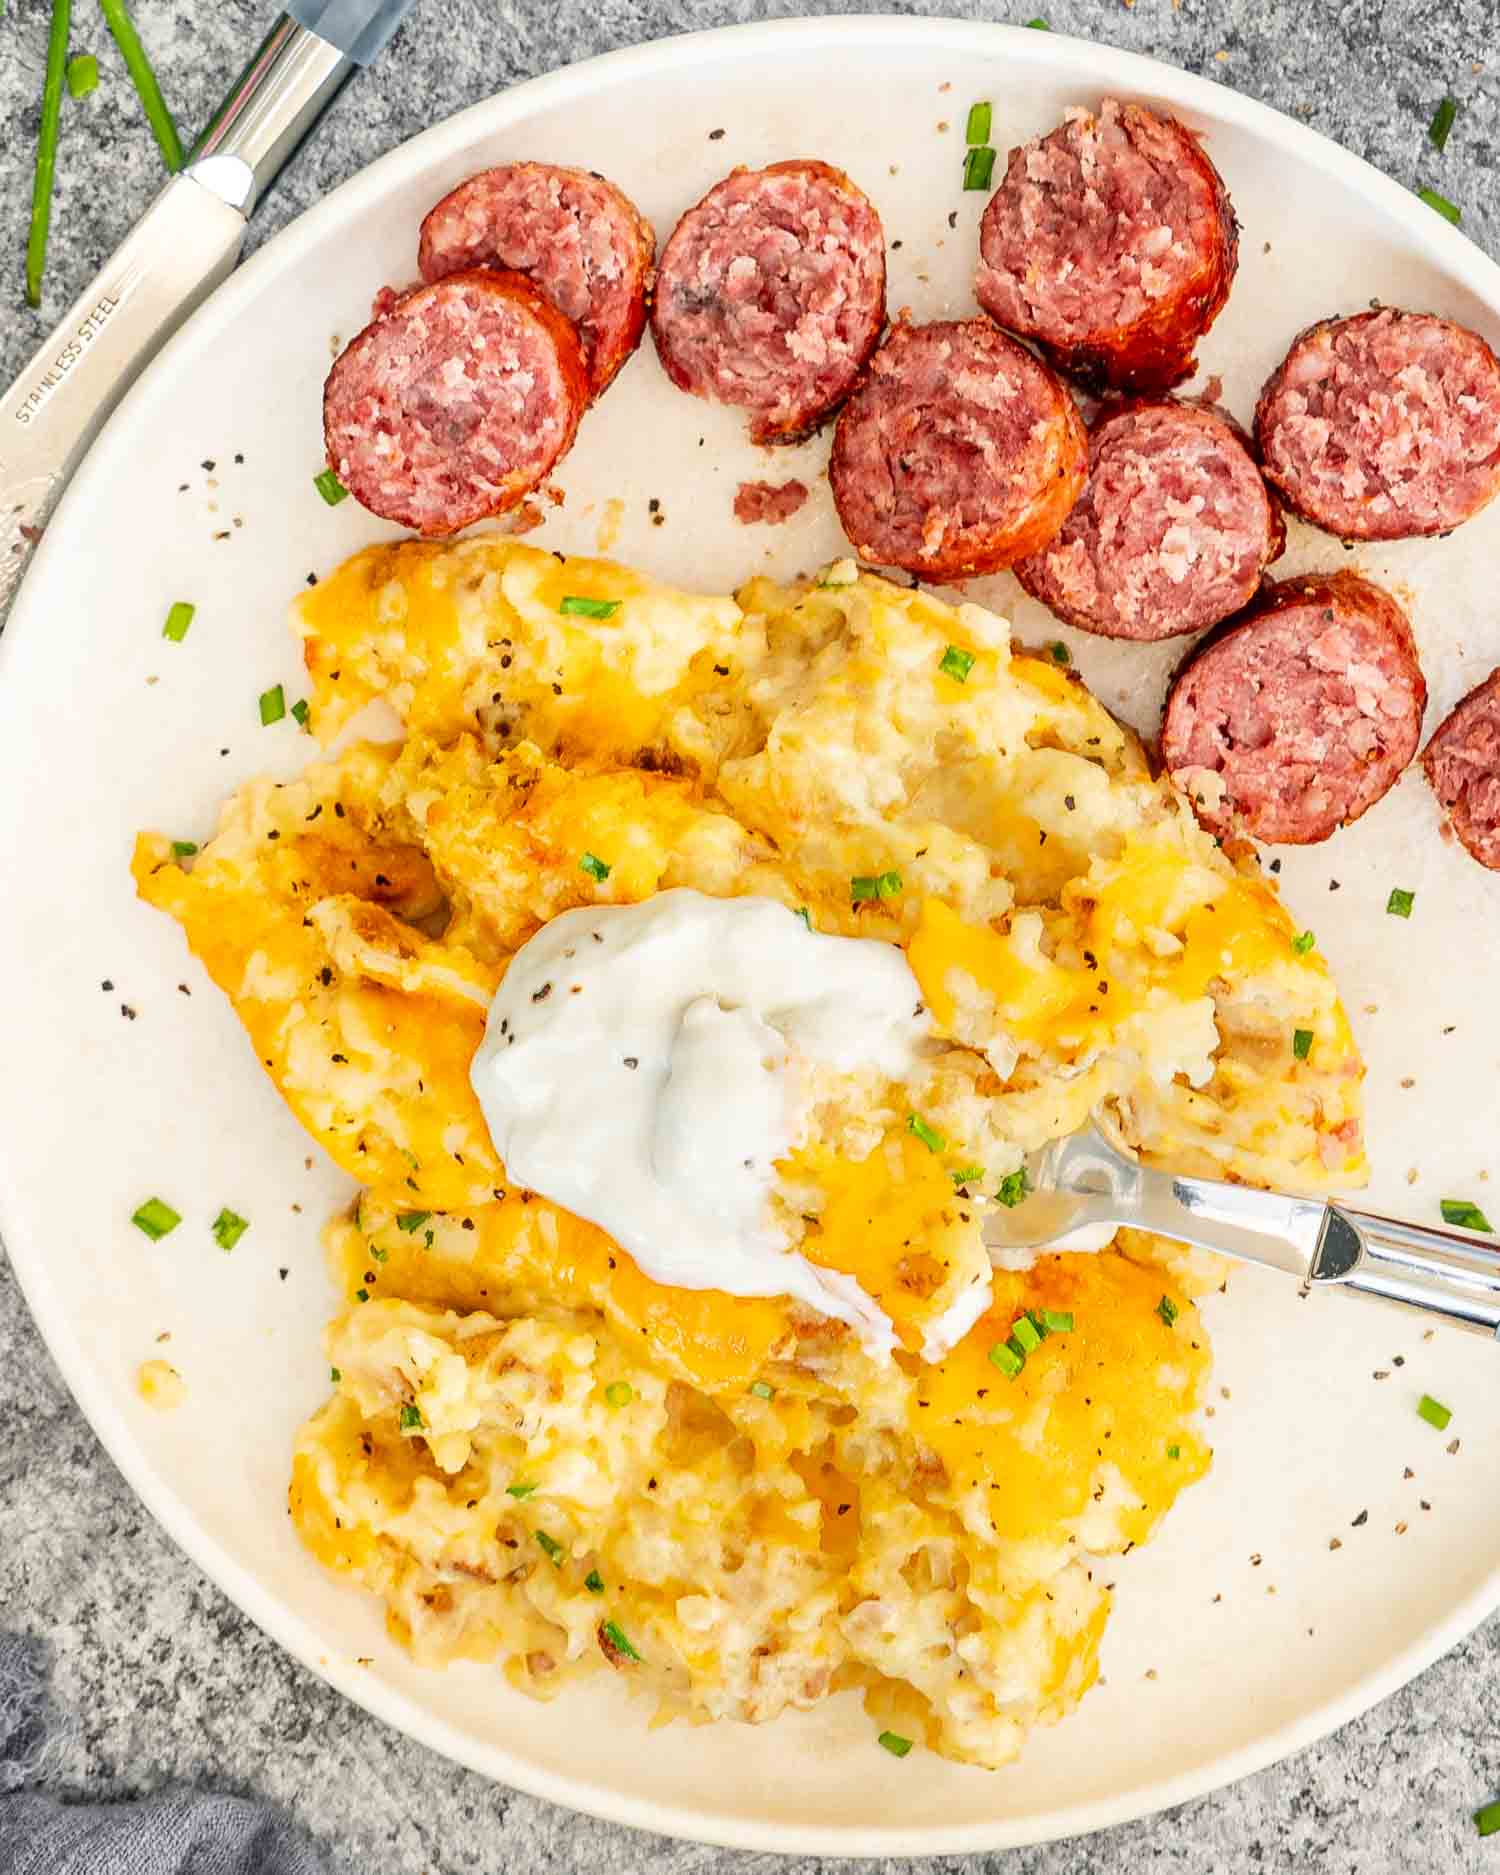 a serving of potatoes romanoff with a dollop of sour cream along some cooked sausage on a white plate.